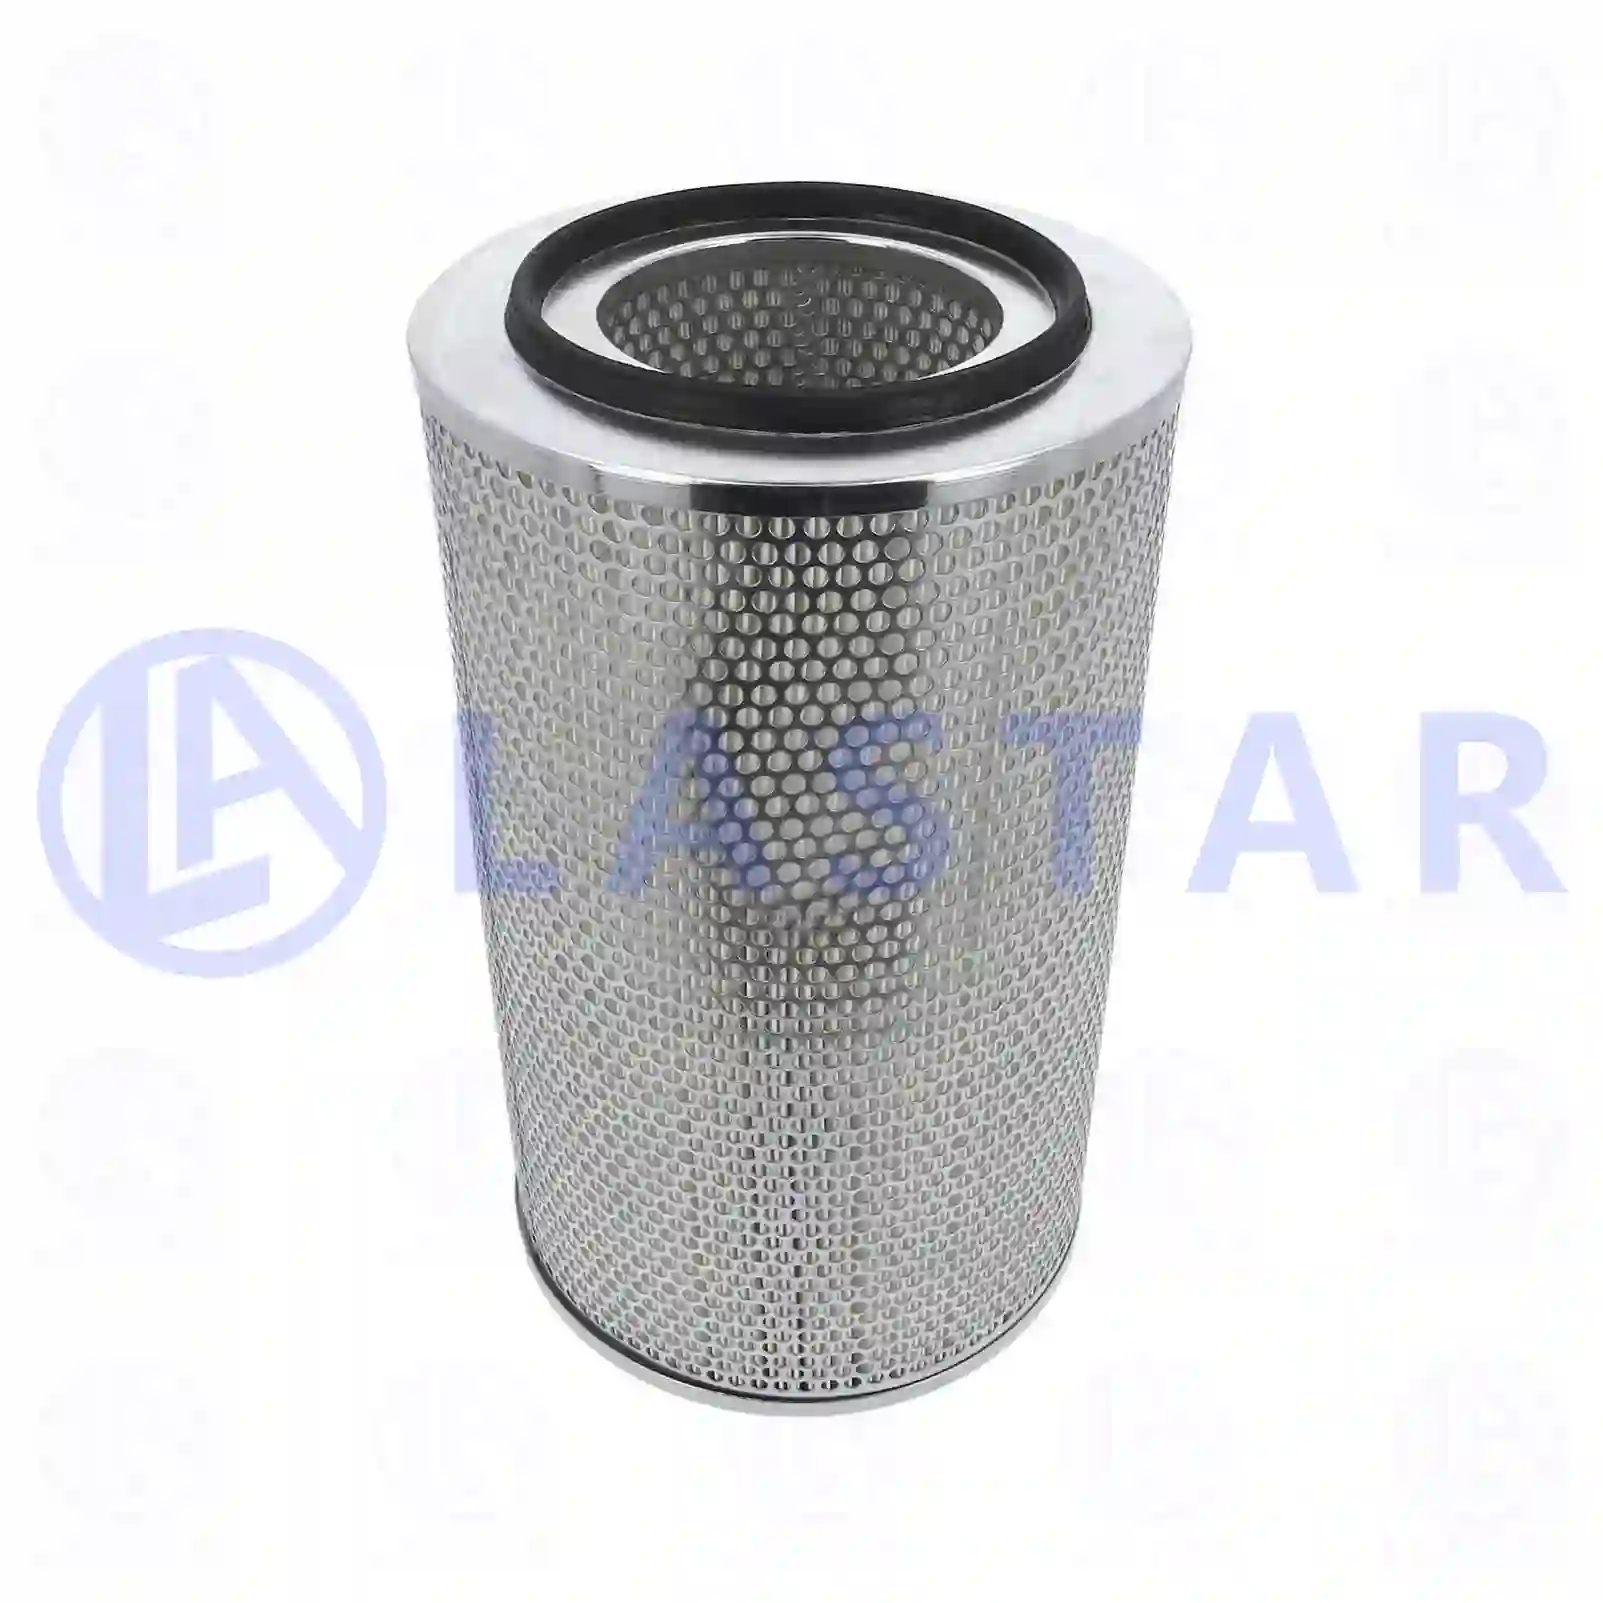 Air filter, 77706177, 2165054, 8009101128000, 3I-0835, 3I-0974, 10944704, 130941702, T0242503, T4212748, T4214314, T4214489, 0001770460, 0001770461, 0112294, 112094, 112294, 1500300, ABU8522, 00687774, 00746444, 074644, 0746444, 29504406, 432622, 43262200, 746444, 74644400, 988766, 98876600, 01902465, 02165041, 02165054, 02165074, 04002576, 09983763, 1210702033400, 8009101128000, 632114, 1318695, 1210702033400, 0746444, 1416433, 1470702, 4134406, 9746444, F385202090010, 00824847, 01186389, 01902046, 01902048, 01902465, 02165041, 02165054, 02165074, 07140555, 08323032, 08323285, 08323286, 08323287, 08323288, 09983763, 75248729, Y03727603, Y05776000, 5011325, 5011556, 5018033, 824847, 9974141, 25096250, 9974141, 2165054, 00632114, 01186389, 01902048, 01902465, 02165054, 02165074, 02165076, 08323032, 08323285, 08323286, 08323287, 08323288, 1186389, 1902048, 1902465, 2165054, 500024503, 75248729, 8323032, 8323285, 8323287, 8323288, AZ26091, 34000460, 02165054, 02165074, 09983763, 02165054, 5106188, 5106534, 5601964, 2191771508, 2191P771508, 04544054104, 04544055104, 04544092304, 04544092664, 81083040036, 81083040045, 81083040064, 82083040036, 85000015182, 85000015277, 0001094474, 0010944704, 0010947404, 0010948904, 0020946204, 0040940904, 0130941702, 3450847304, 3450947304, 020315400, 00824847, 80913927, 87682981, 16546-D9200, 632114, 99000190075, 99000190702, 99012190701, 0002214489, 0003563595, 0004212748, 0004214189, 0004214314, 0004214489, 0022004800, 0500242503, 5000242503, 5000283088, 5000286773, 5000783932, 5001834750, 5010094144, 6005019662, 7485129567, R9601, ABU8522, 4631072000, 4631072020, 235586, 8315085102, 8319085102, 99000190075, 99000190702, 99012190701, 5501660684, 16546D9200, 805044, 80504400, 80504410, 601200960, 631204401, 12705260, CH12242, 6644990, 66449901, 6644991, 664990, 79359626, T15129620, ZG00825-0008 ||  77706177 Lastar Spare Part | Truck Spare Parts, Auotomotive Spare Parts Air filter, 77706177, 2165054, 8009101128000, 3I-0835, 3I-0974, 10944704, 130941702, T0242503, T4212748, T4214314, T4214489, 0001770460, 0001770461, 0112294, 112094, 112294, 1500300, ABU8522, 00687774, 00746444, 074644, 0746444, 29504406, 432622, 43262200, 746444, 74644400, 988766, 98876600, 01902465, 02165041, 02165054, 02165074, 04002576, 09983763, 1210702033400, 8009101128000, 632114, 1318695, 1210702033400, 0746444, 1416433, 1470702, 4134406, 9746444, F385202090010, 00824847, 01186389, 01902046, 01902048, 01902465, 02165041, 02165054, 02165074, 07140555, 08323032, 08323285, 08323286, 08323287, 08323288, 09983763, 75248729, Y03727603, Y05776000, 5011325, 5011556, 5018033, 824847, 9974141, 25096250, 9974141, 2165054, 00632114, 01186389, 01902048, 01902465, 02165054, 02165074, 02165076, 08323032, 08323285, 08323286, 08323287, 08323288, 1186389, 1902048, 1902465, 2165054, 500024503, 75248729, 8323032, 8323285, 8323287, 8323288, AZ26091, 34000460, 02165054, 02165074, 09983763, 02165054, 5106188, 5106534, 5601964, 2191771508, 2191P771508, 04544054104, 04544055104, 04544092304, 04544092664, 81083040036, 81083040045, 81083040064, 82083040036, 85000015182, 85000015277, 0001094474, 0010944704, 0010947404, 0010948904, 0020946204, 0040940904, 0130941702, 3450847304, 3450947304, 020315400, 00824847, 80913927, 87682981, 16546-D9200, 632114, 99000190075, 99000190702, 99012190701, 0002214489, 0003563595, 0004212748, 0004214189, 0004214314, 0004214489, 0022004800, 0500242503, 5000242503, 5000283088, 5000286773, 5000783932, 5001834750, 5010094144, 6005019662, 7485129567, R9601, ABU8522, 4631072000, 4631072020, 235586, 8315085102, 8319085102, 99000190075, 99000190702, 99012190701, 5501660684, 16546D9200, 805044, 80504400, 80504410, 601200960, 631204401, 12705260, CH12242, 6644990, 66449901, 6644991, 664990, 79359626, T15129620, ZG00825-0008 ||  77706177 Lastar Spare Part | Truck Spare Parts, Auotomotive Spare Parts